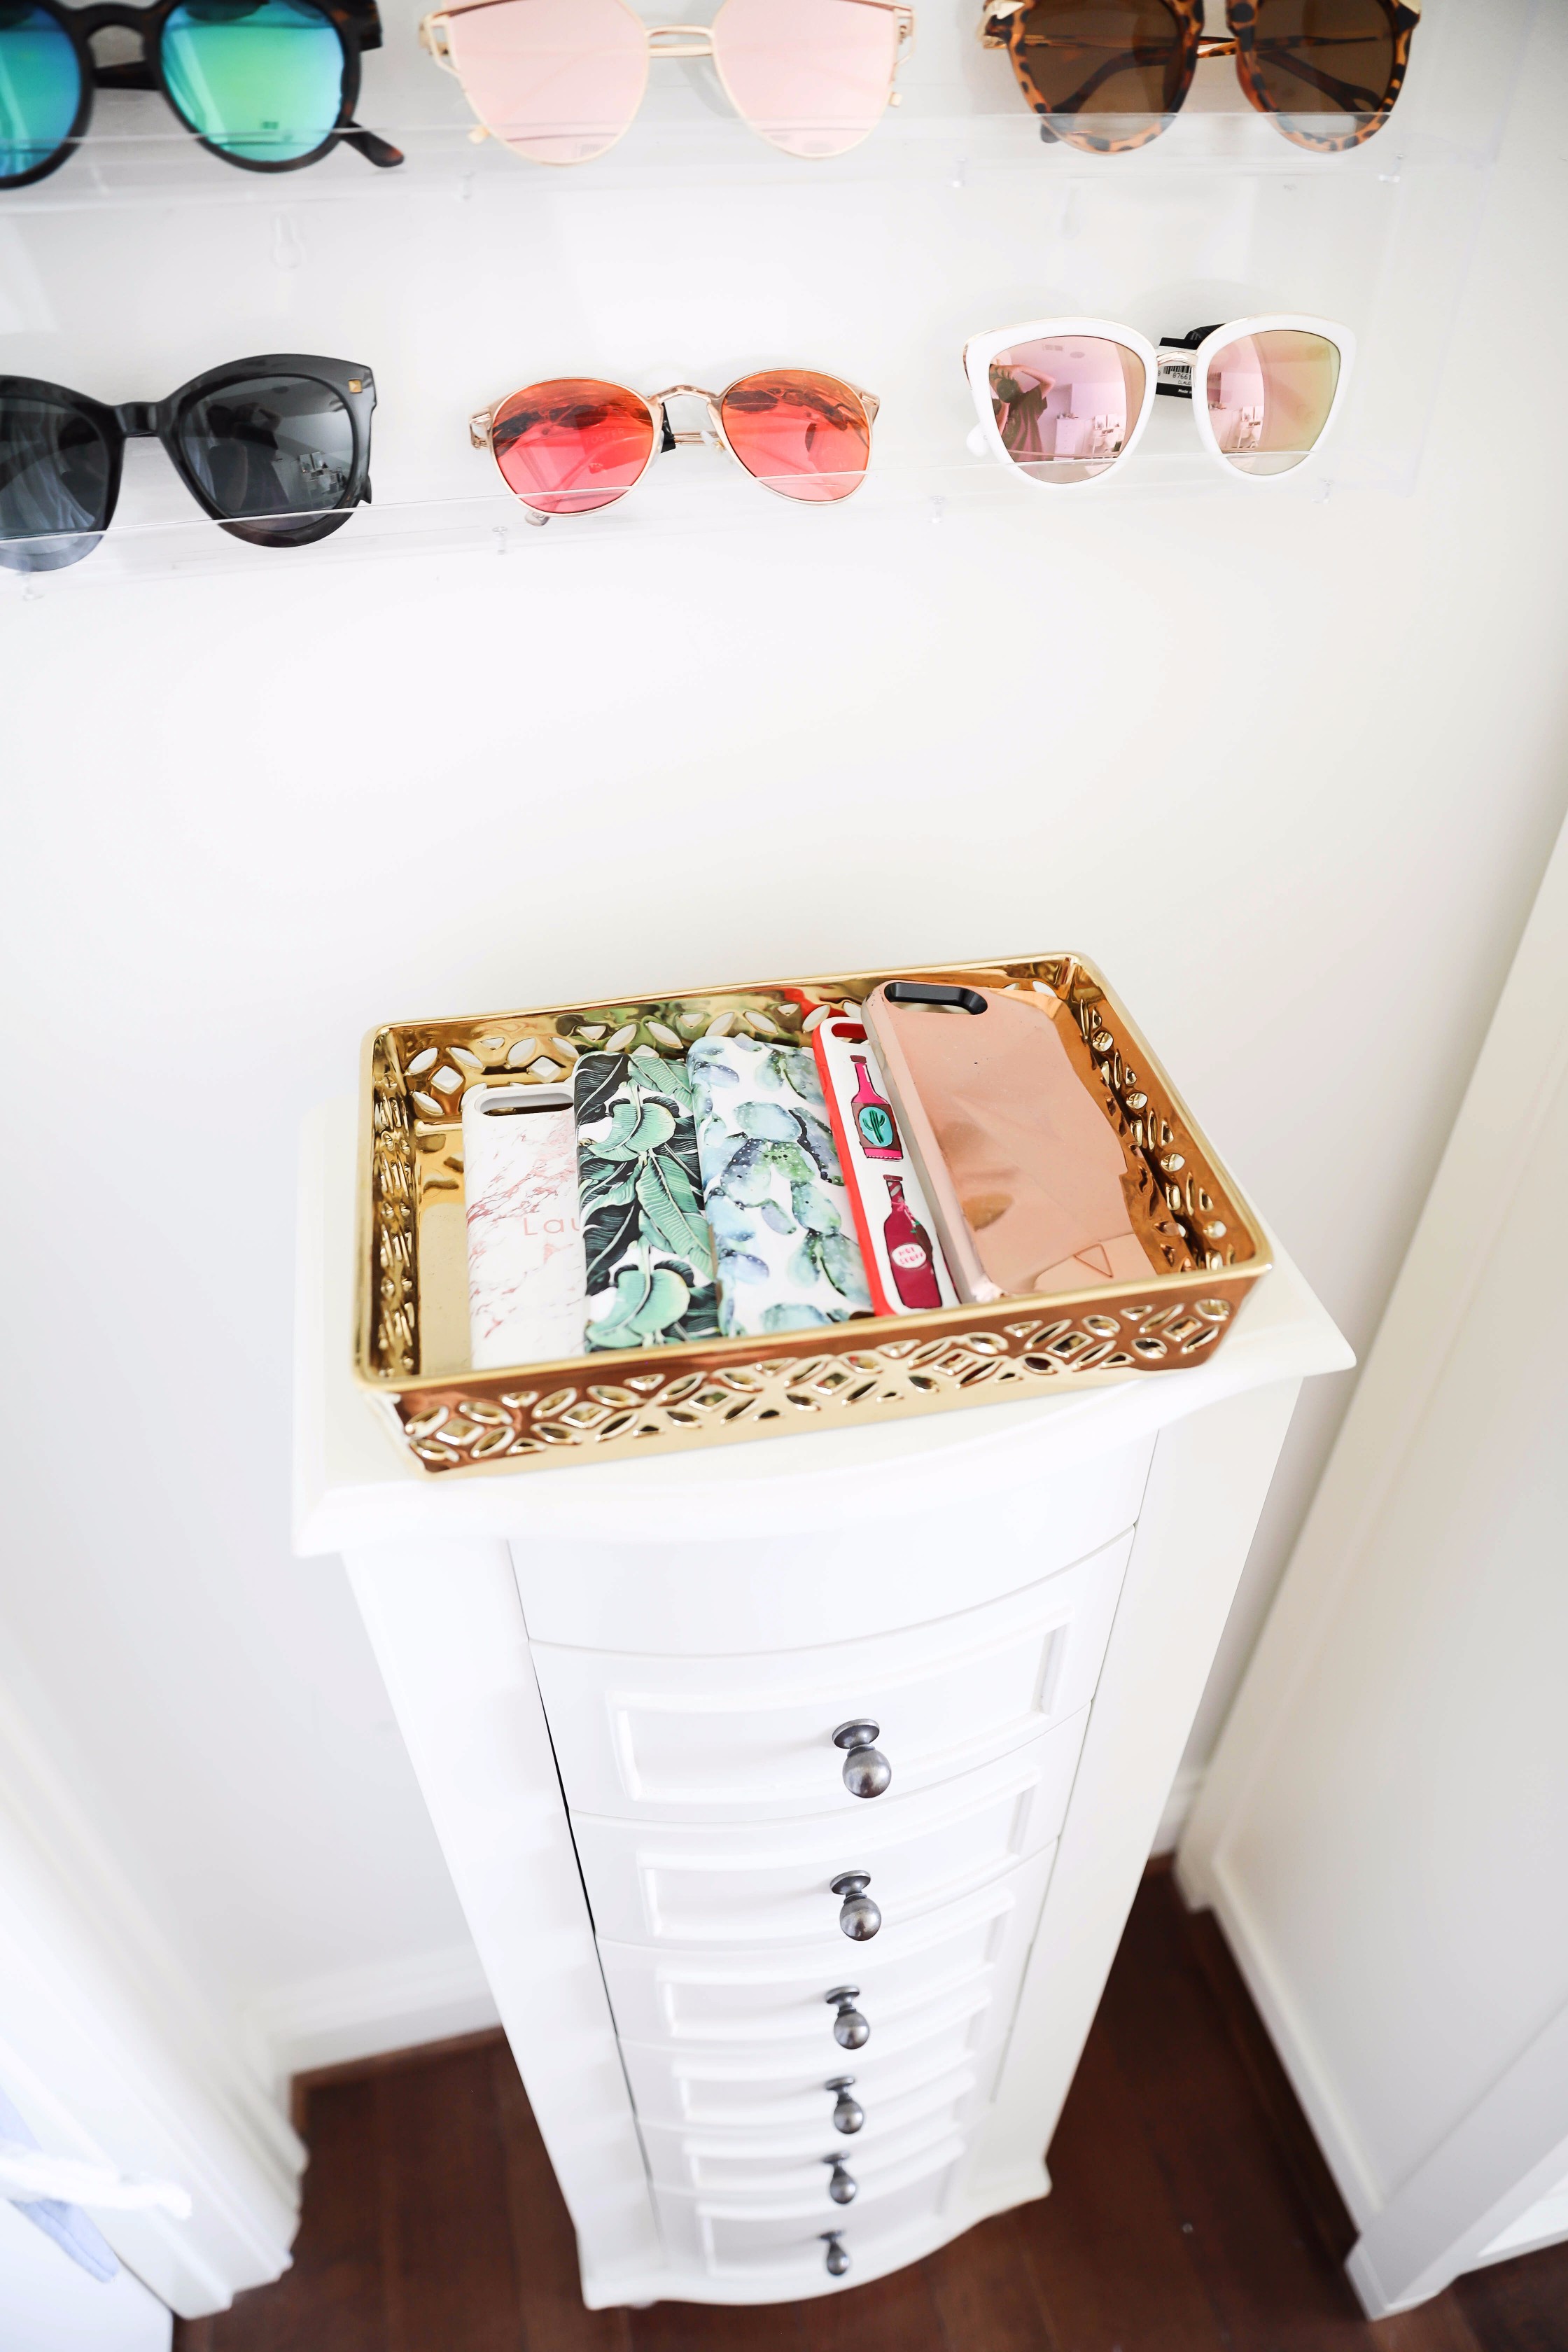 Palm leaf room tour! The perfect summer room decor is up this cute blog! I can't get enough of the palm leaves, tropical decor! Check out all the details on fashion and design blog daily dose of charm by lauren lindmark